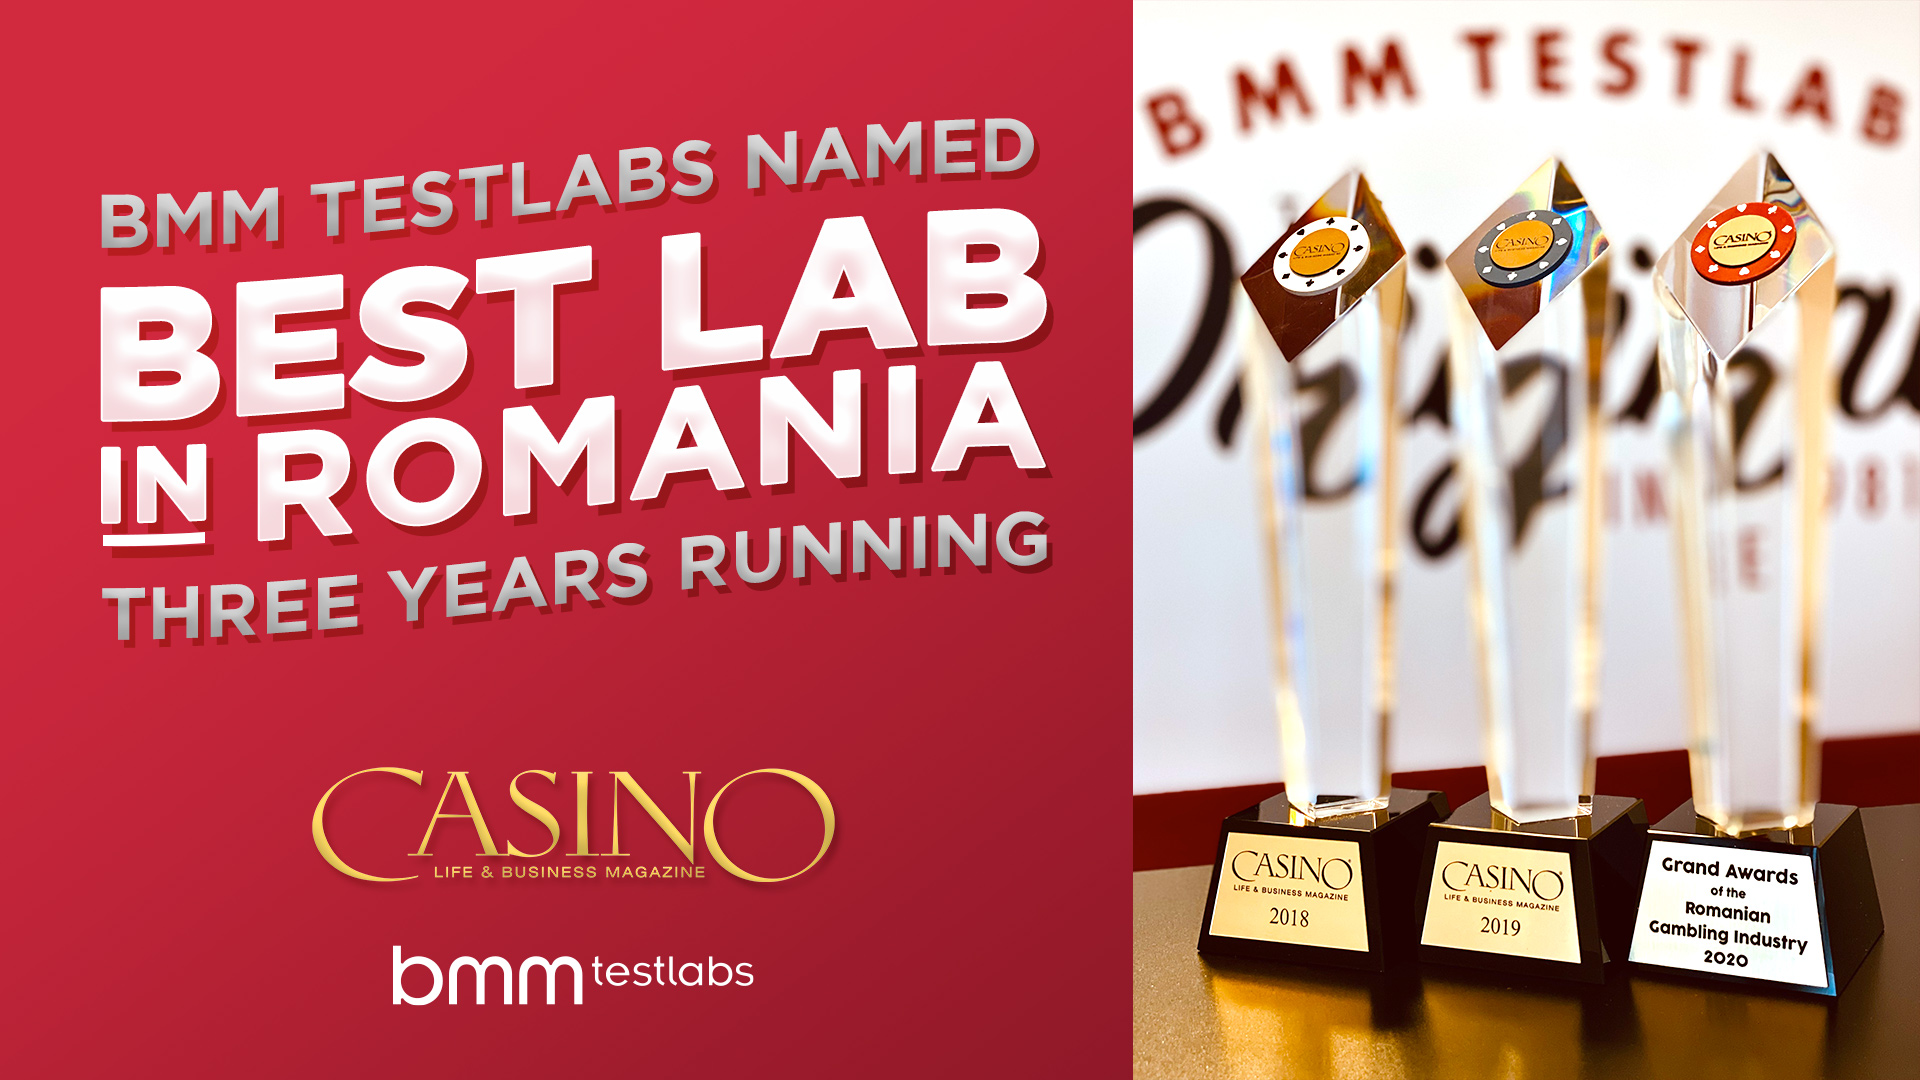 BMM Testlabs Named as Best Lab in Romania 3rd Year in a Row by Casino Life and Business Magazine